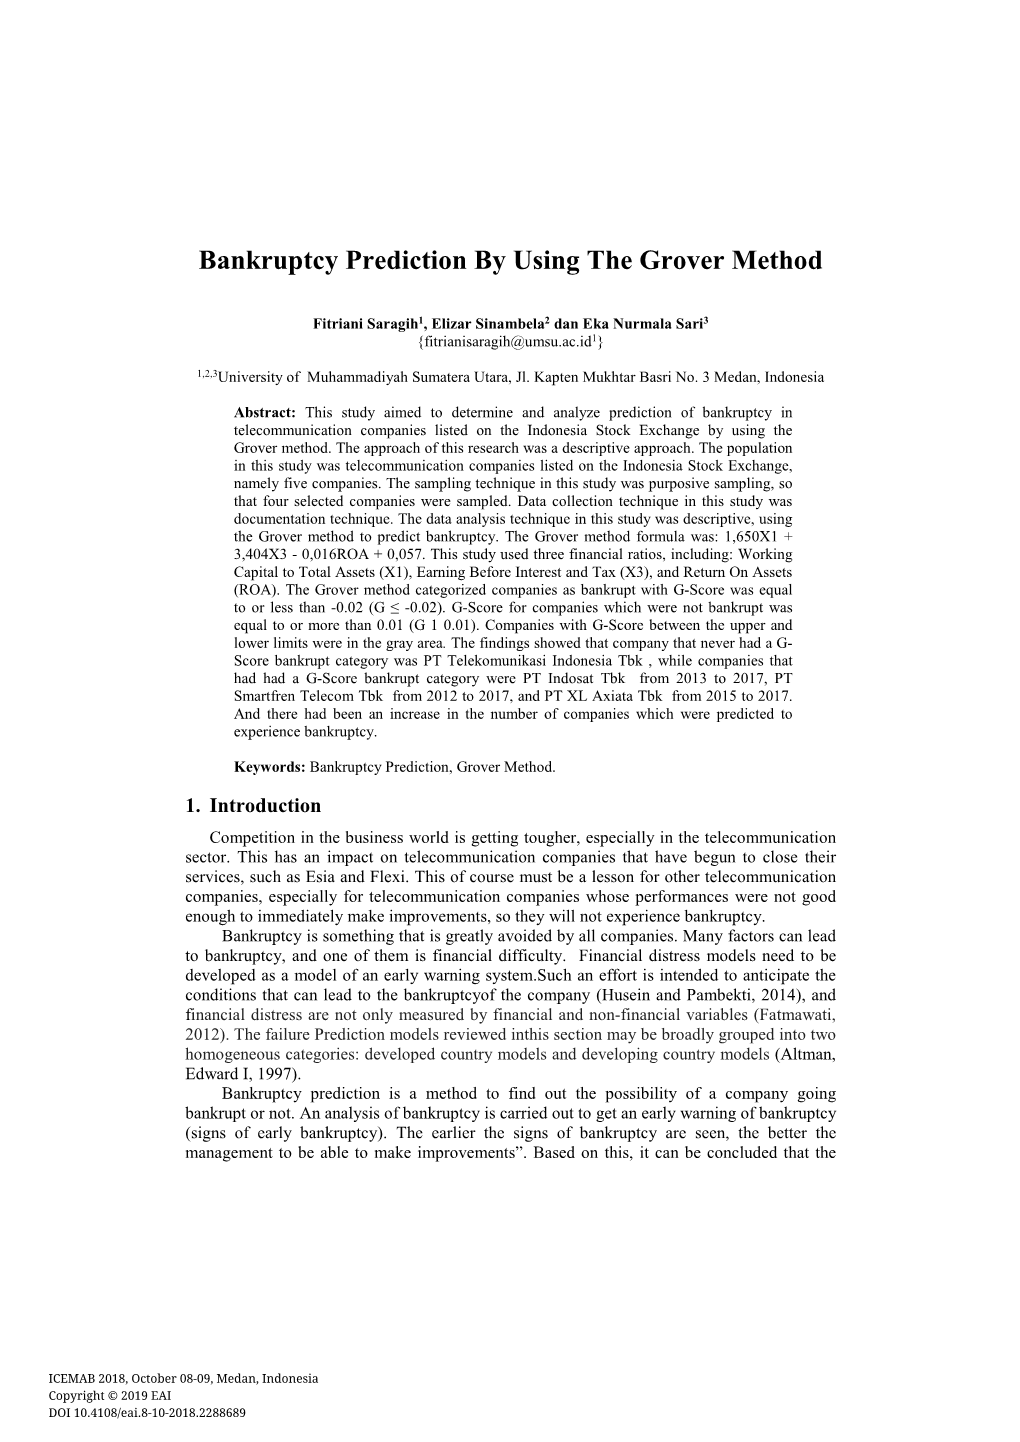 Bankruptcy Prediction by Using the Grover Method